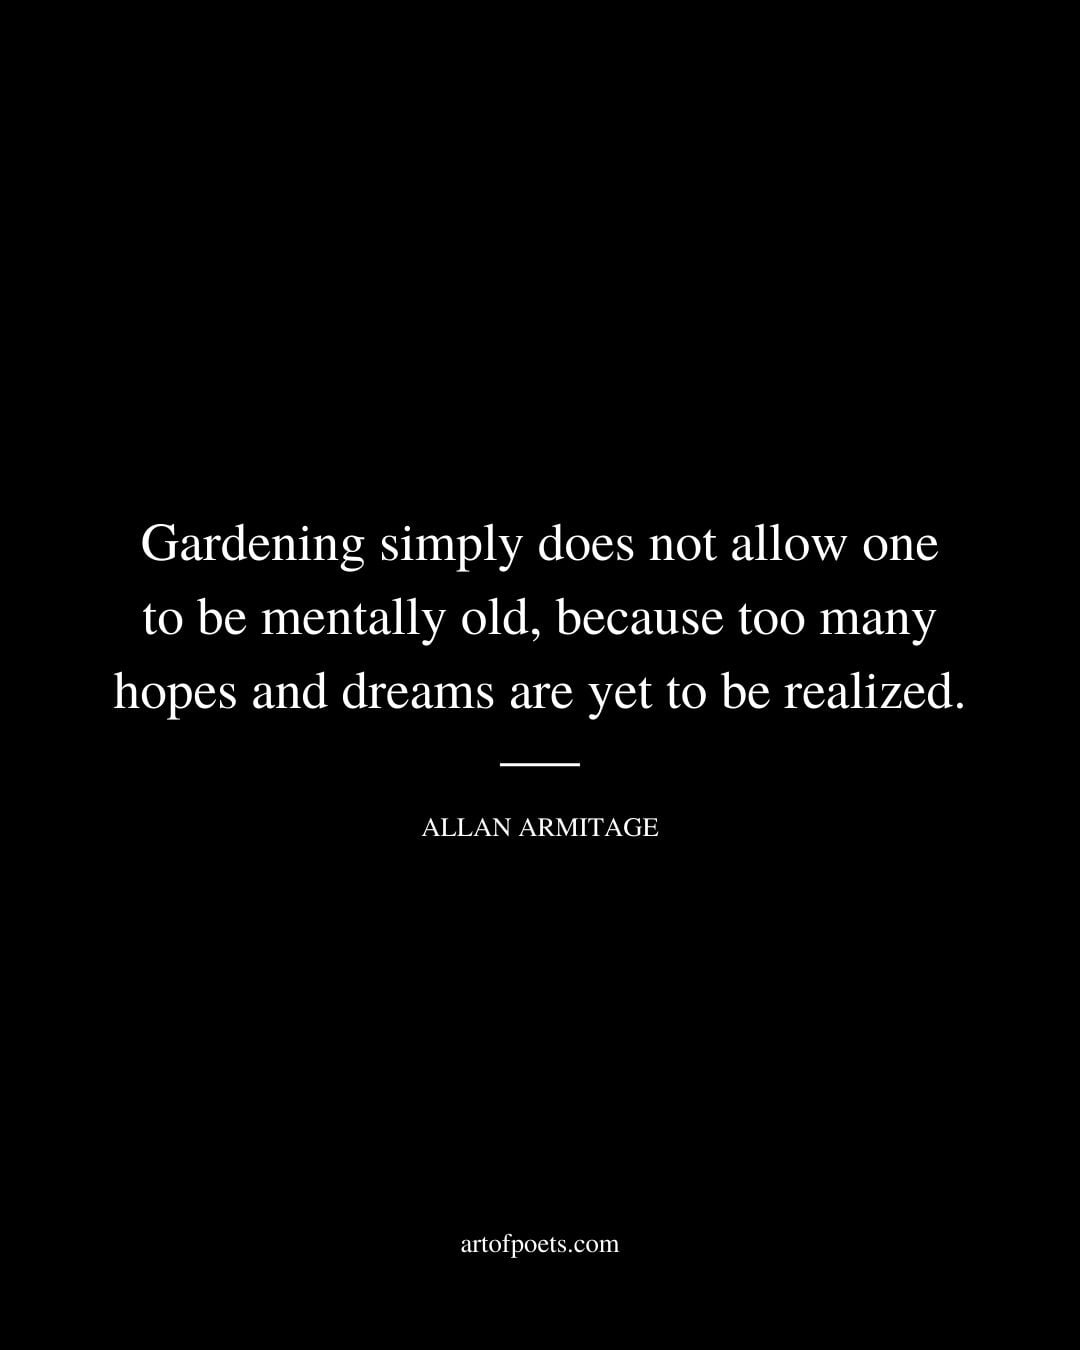 Gardening simply does not allow one to be mentally old because too many hopes and dreams are yet to be realized. – Allan Armitage